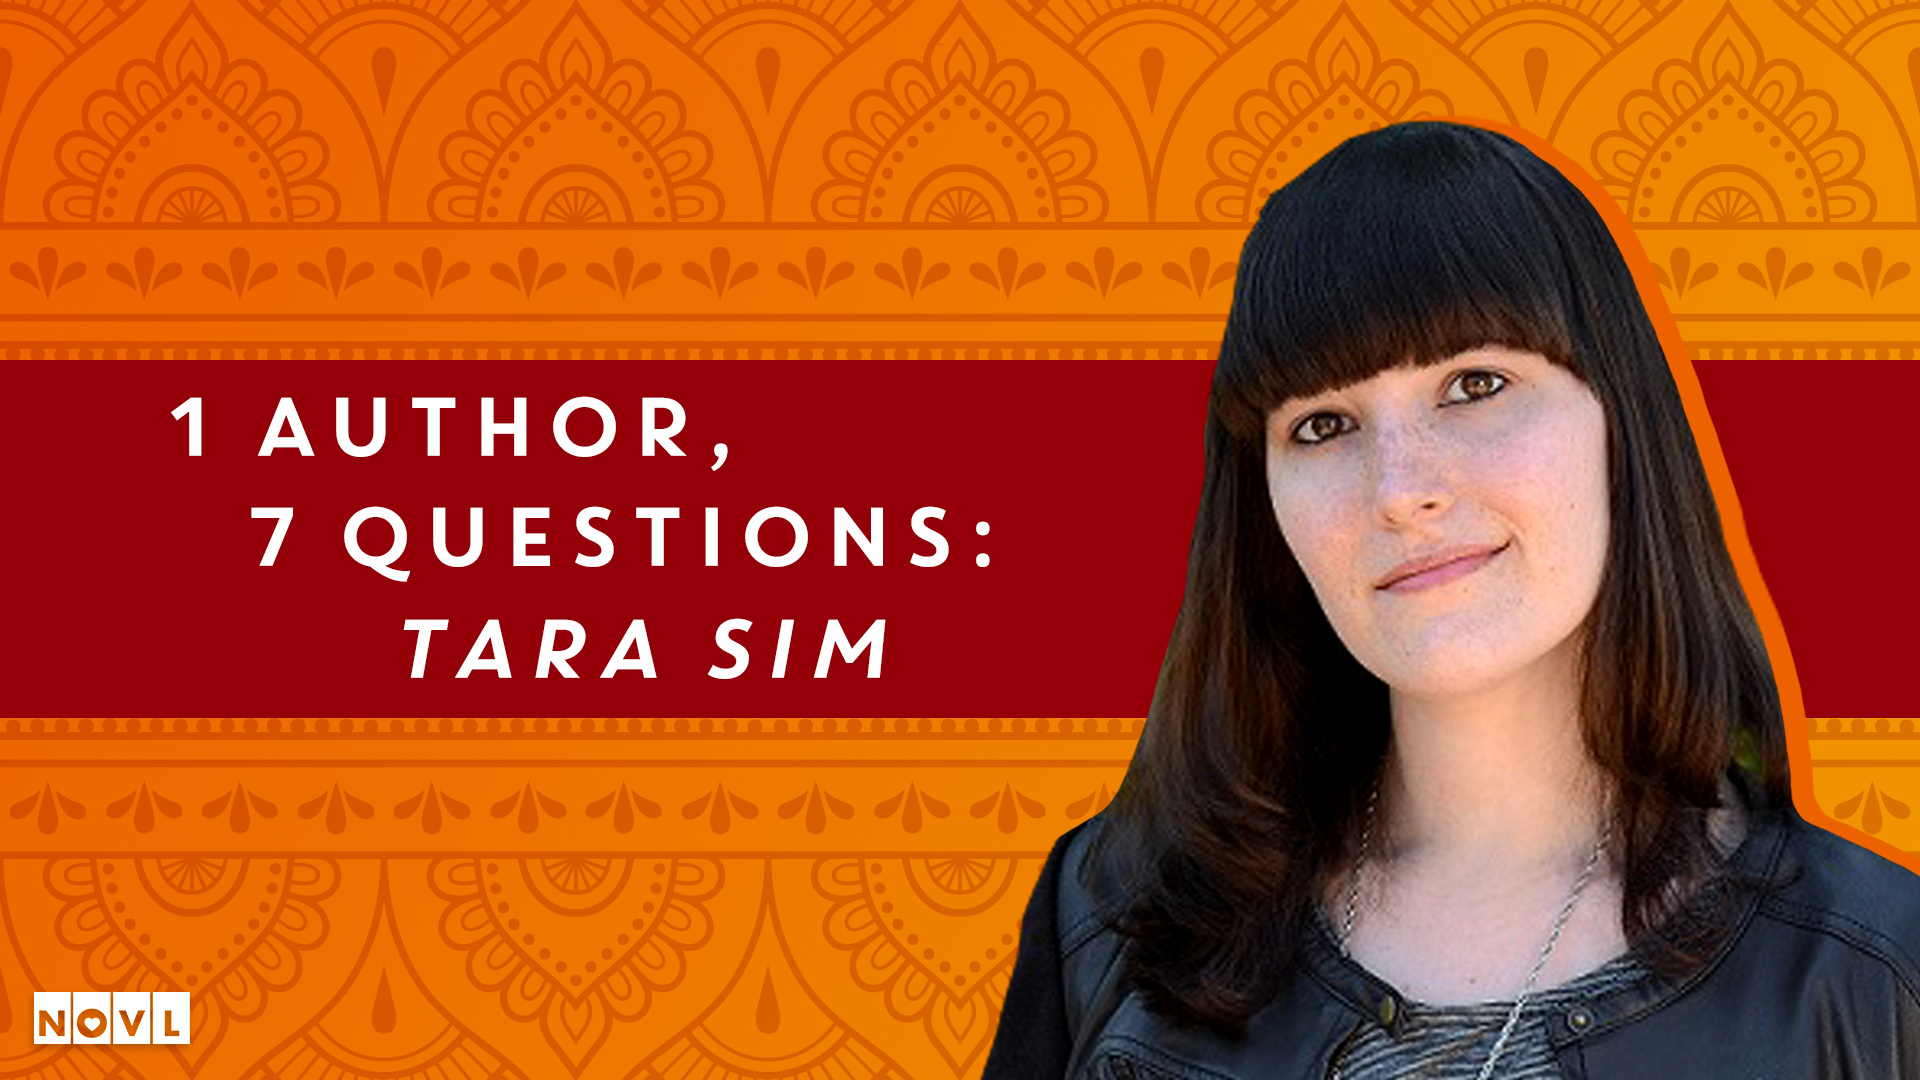 The NOVL Blog, Featured Image for Article: 1 Author, 7 Questions: Tara Sim